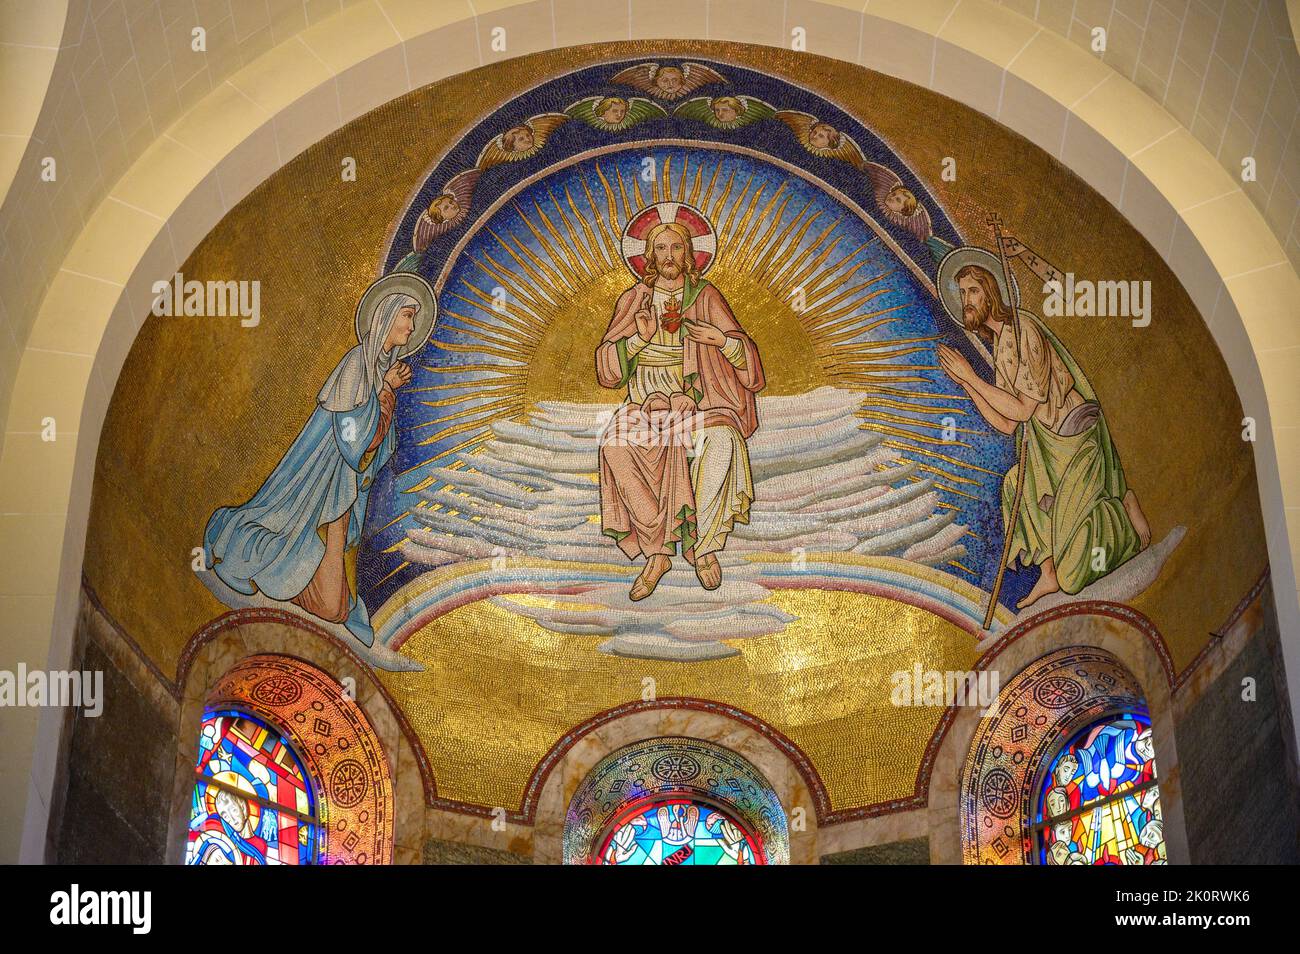 Apse depicting Christ in Majesty and His Most Sacred Heart adored by the Virgin Mary and John the Baptist. The Church of Saints Cosmas & Damian. Stock Photo